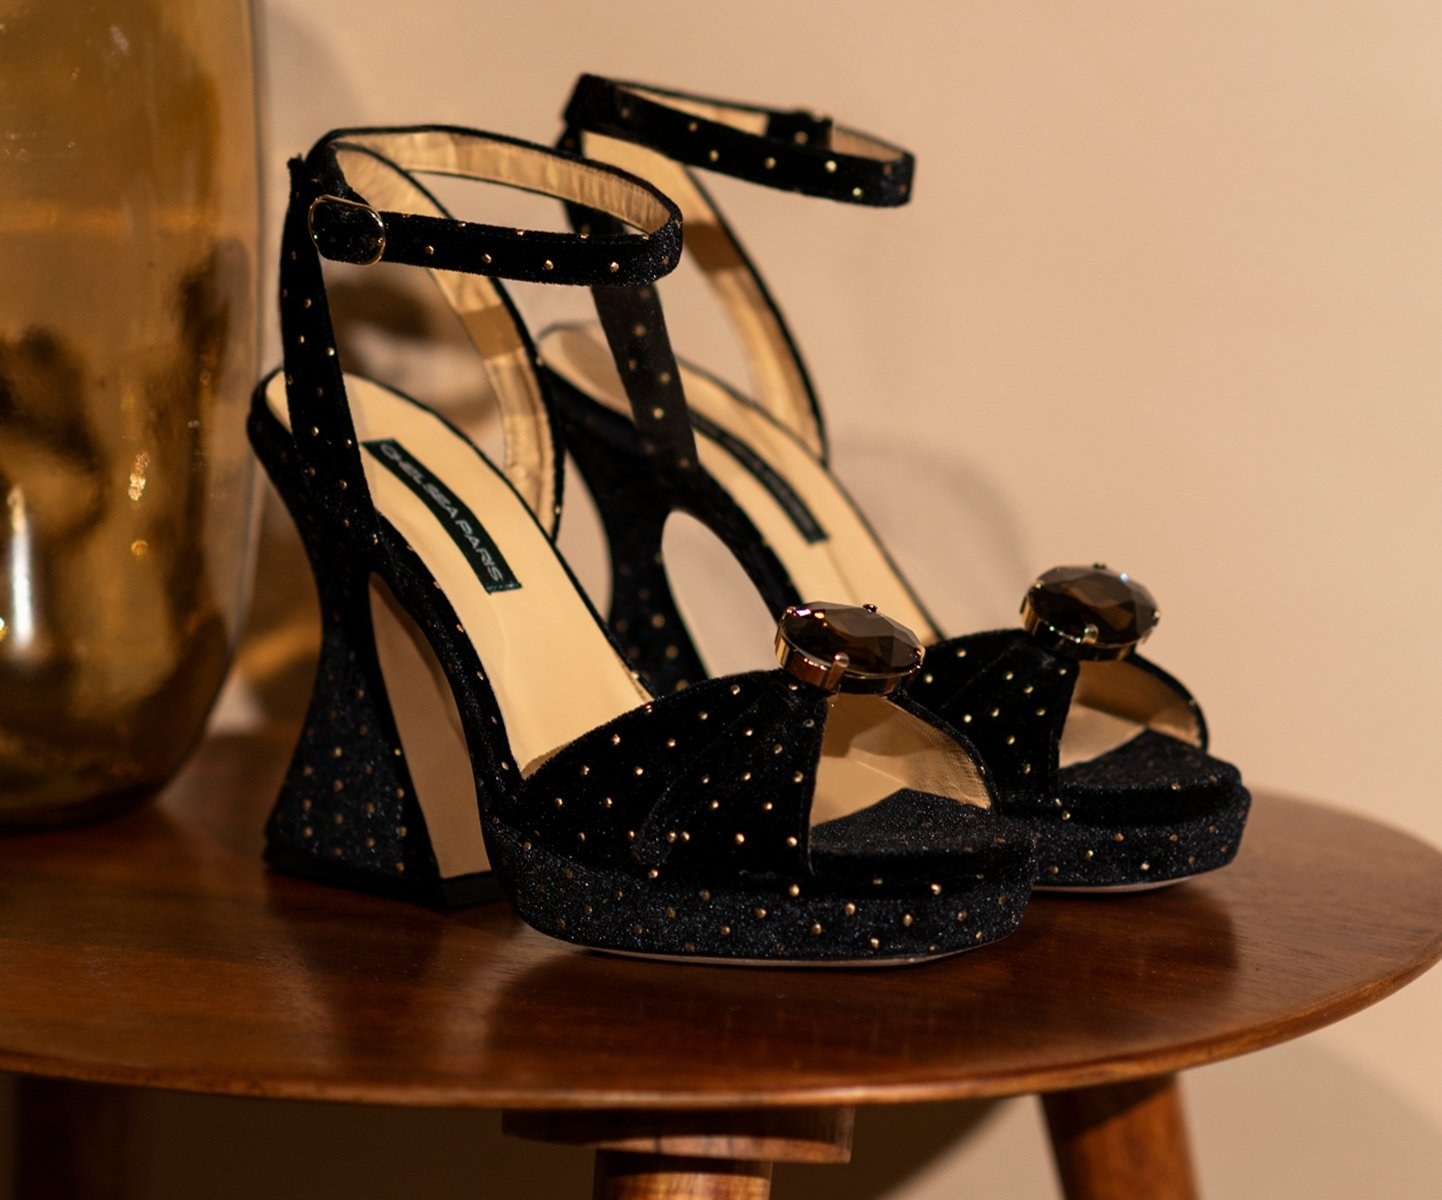 Kelso retro sandals in black gold